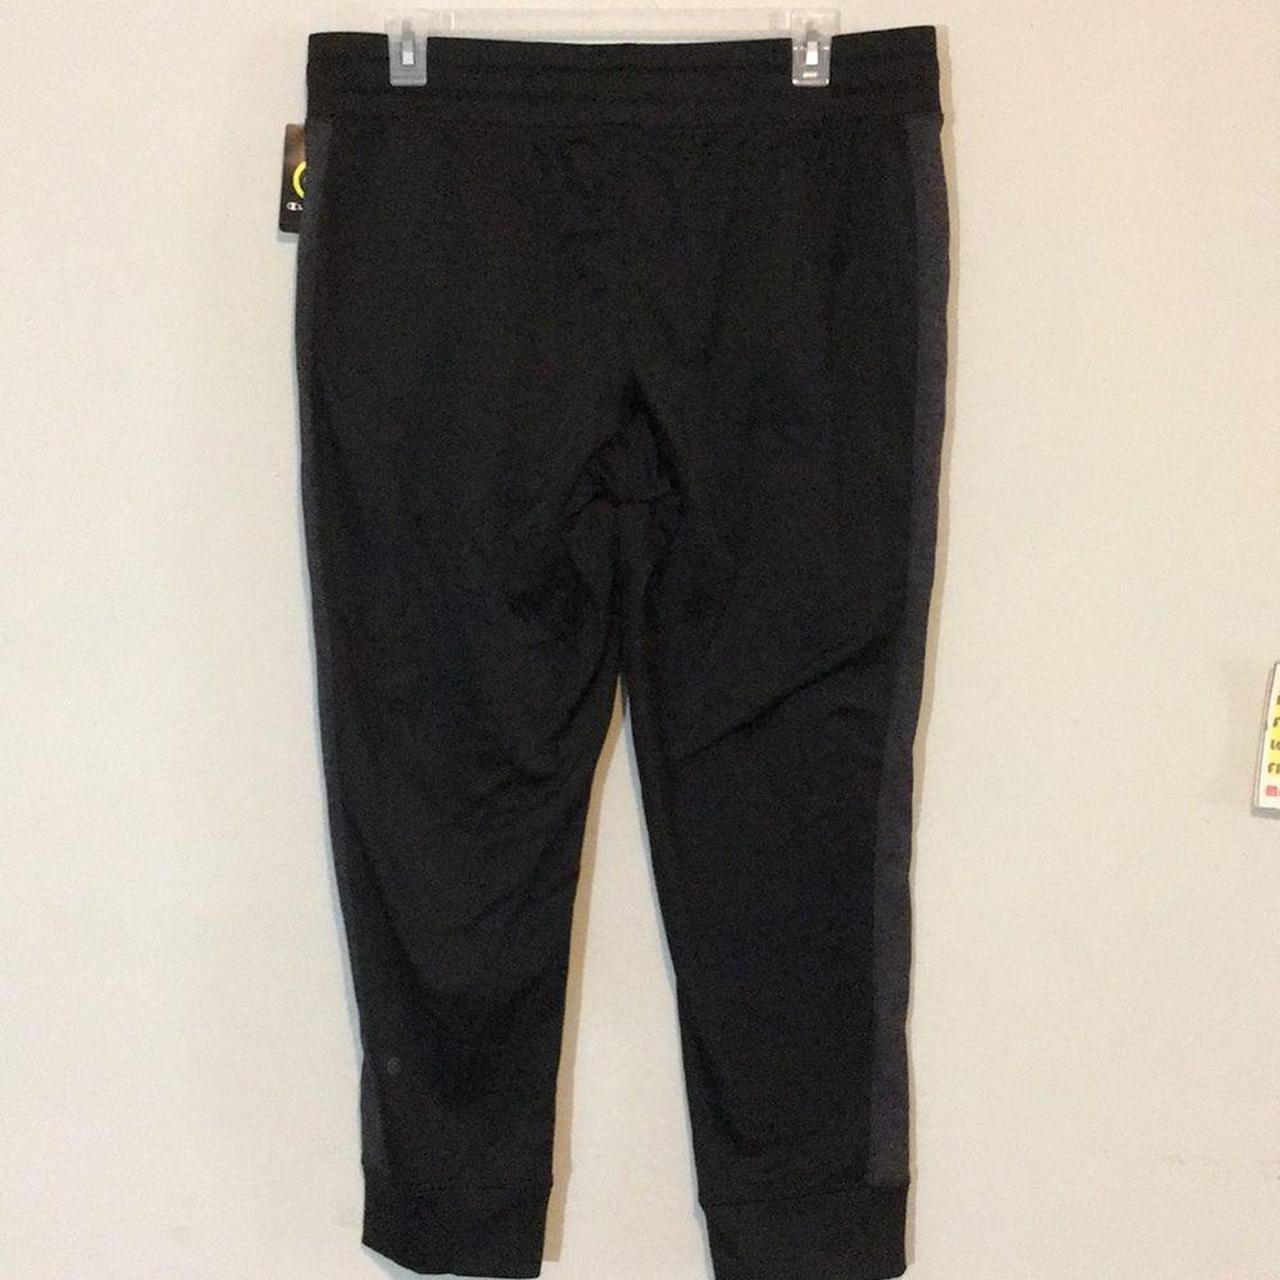 Champion Women's Black and Grey Trousers (4)